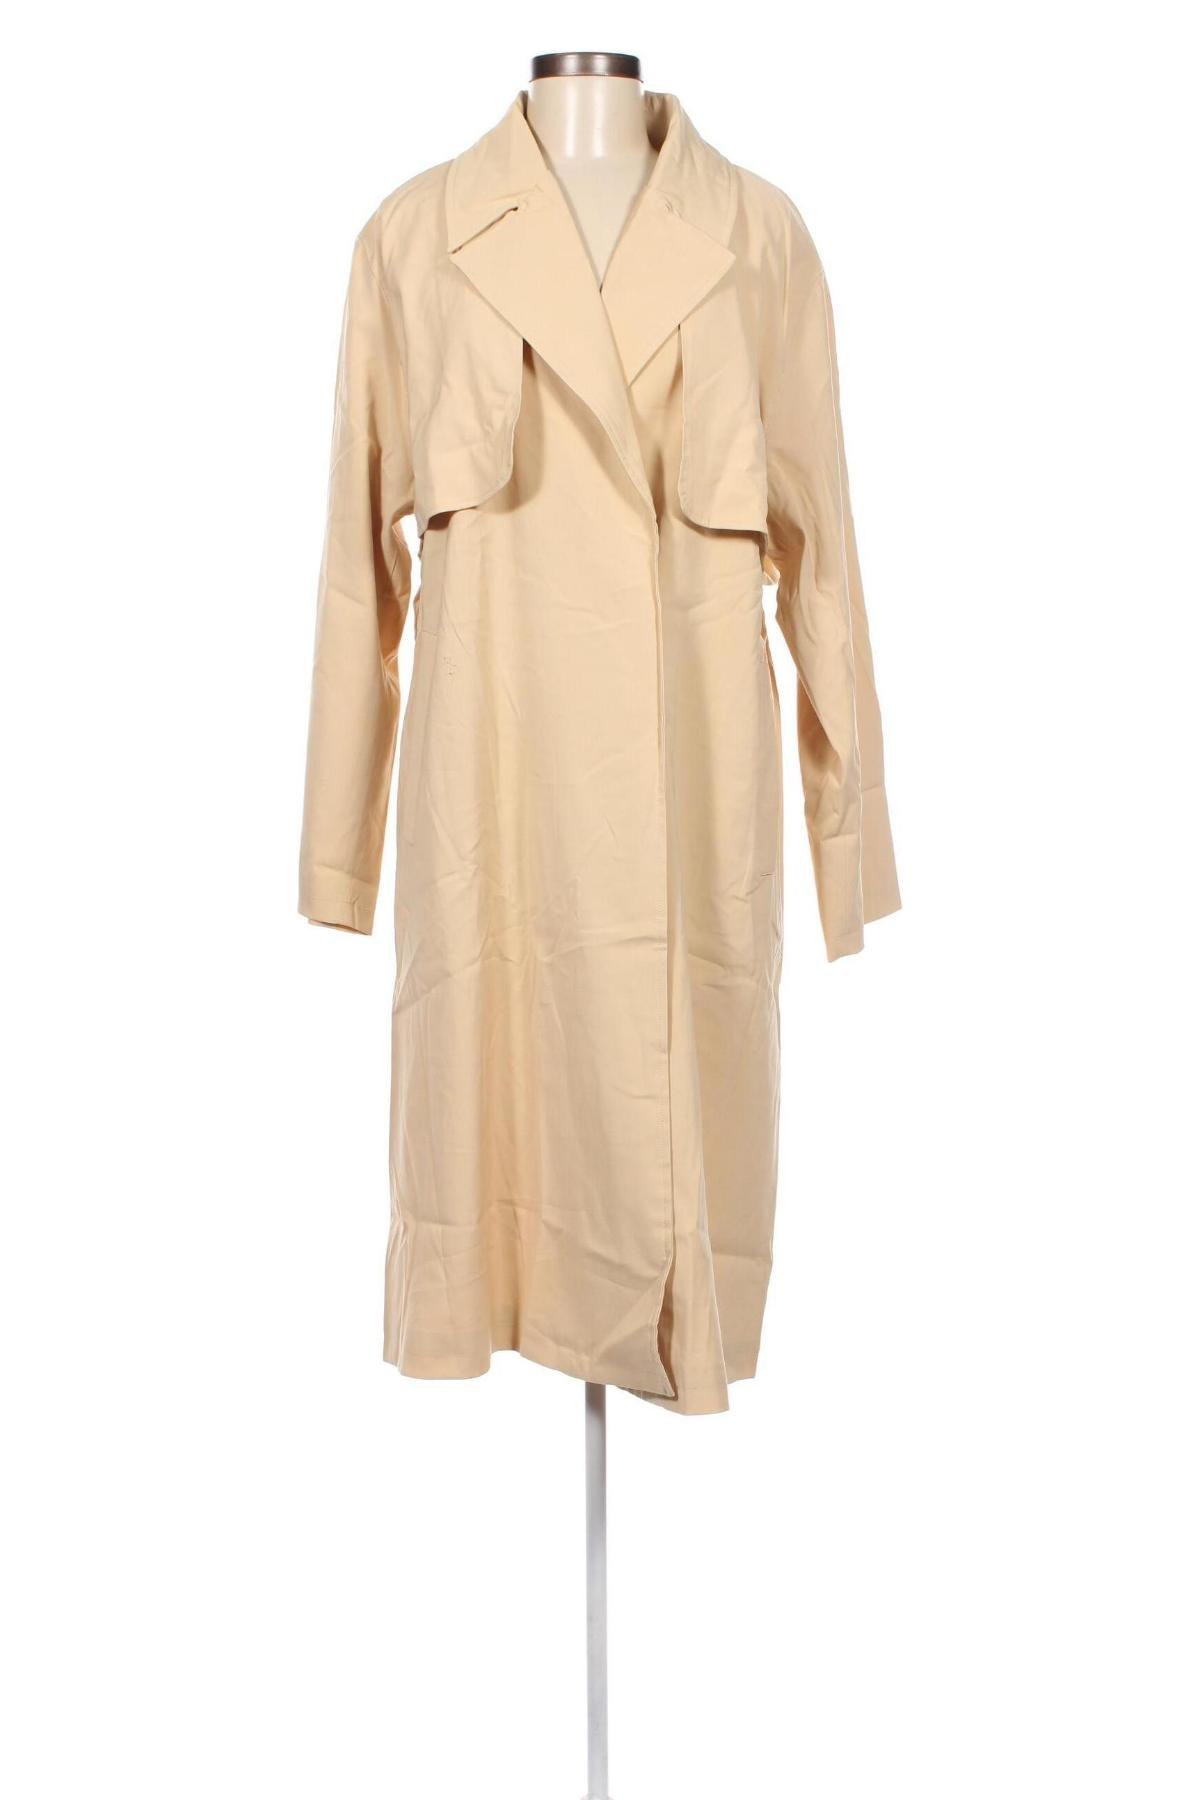 Damen Trench Coat Katy Perry exclusive for ABOUT YOU, Größe S, Farbe Beige, Preis € 115,98